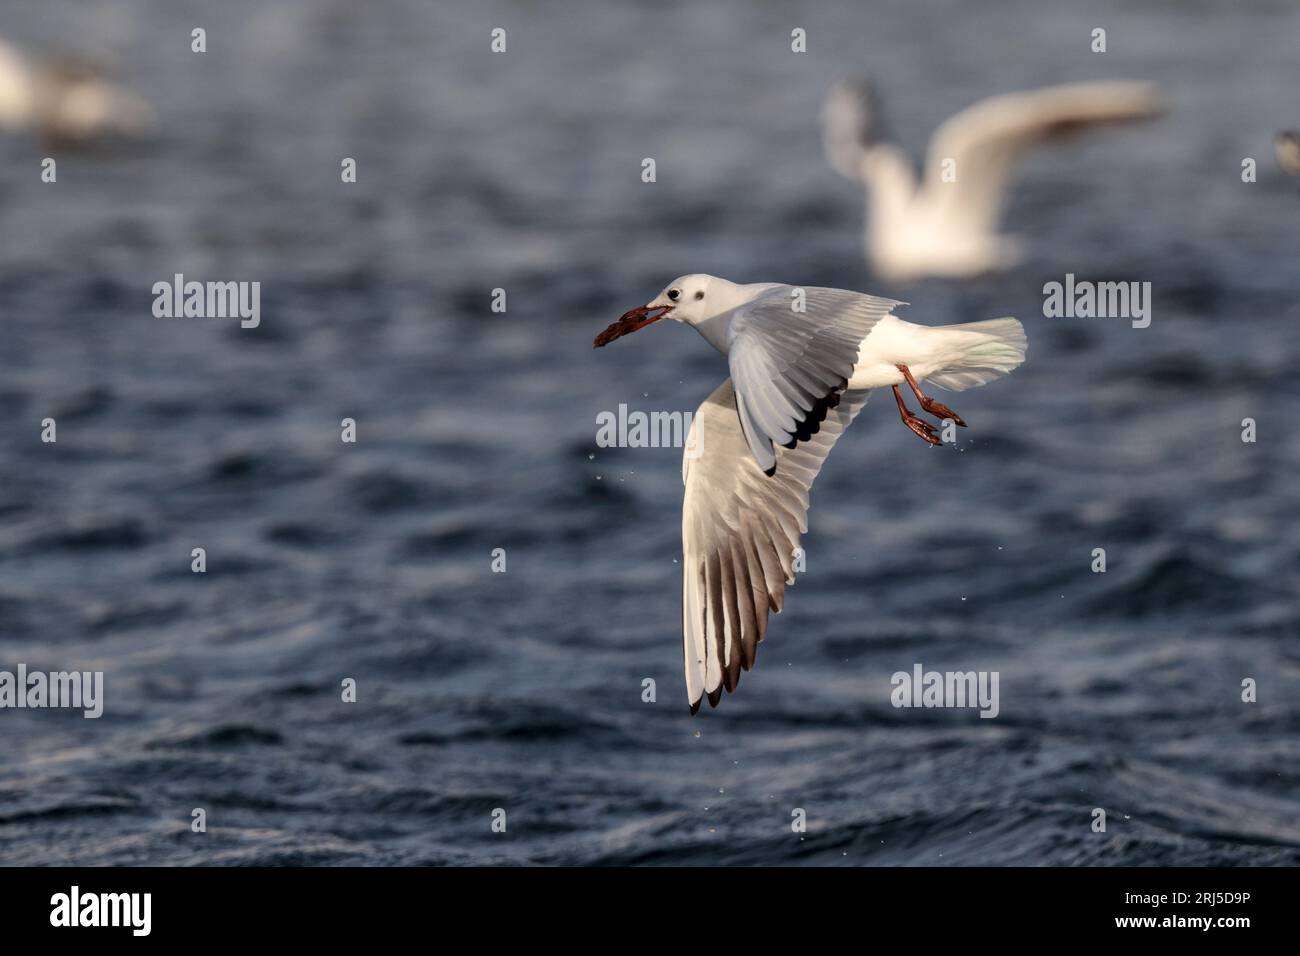 Flying juvenile black headed gull carrying a clump of dried seagrasses. Curious habit of gulls picking and carrying seagrass.. Malta, Mediterranean Stock Photo